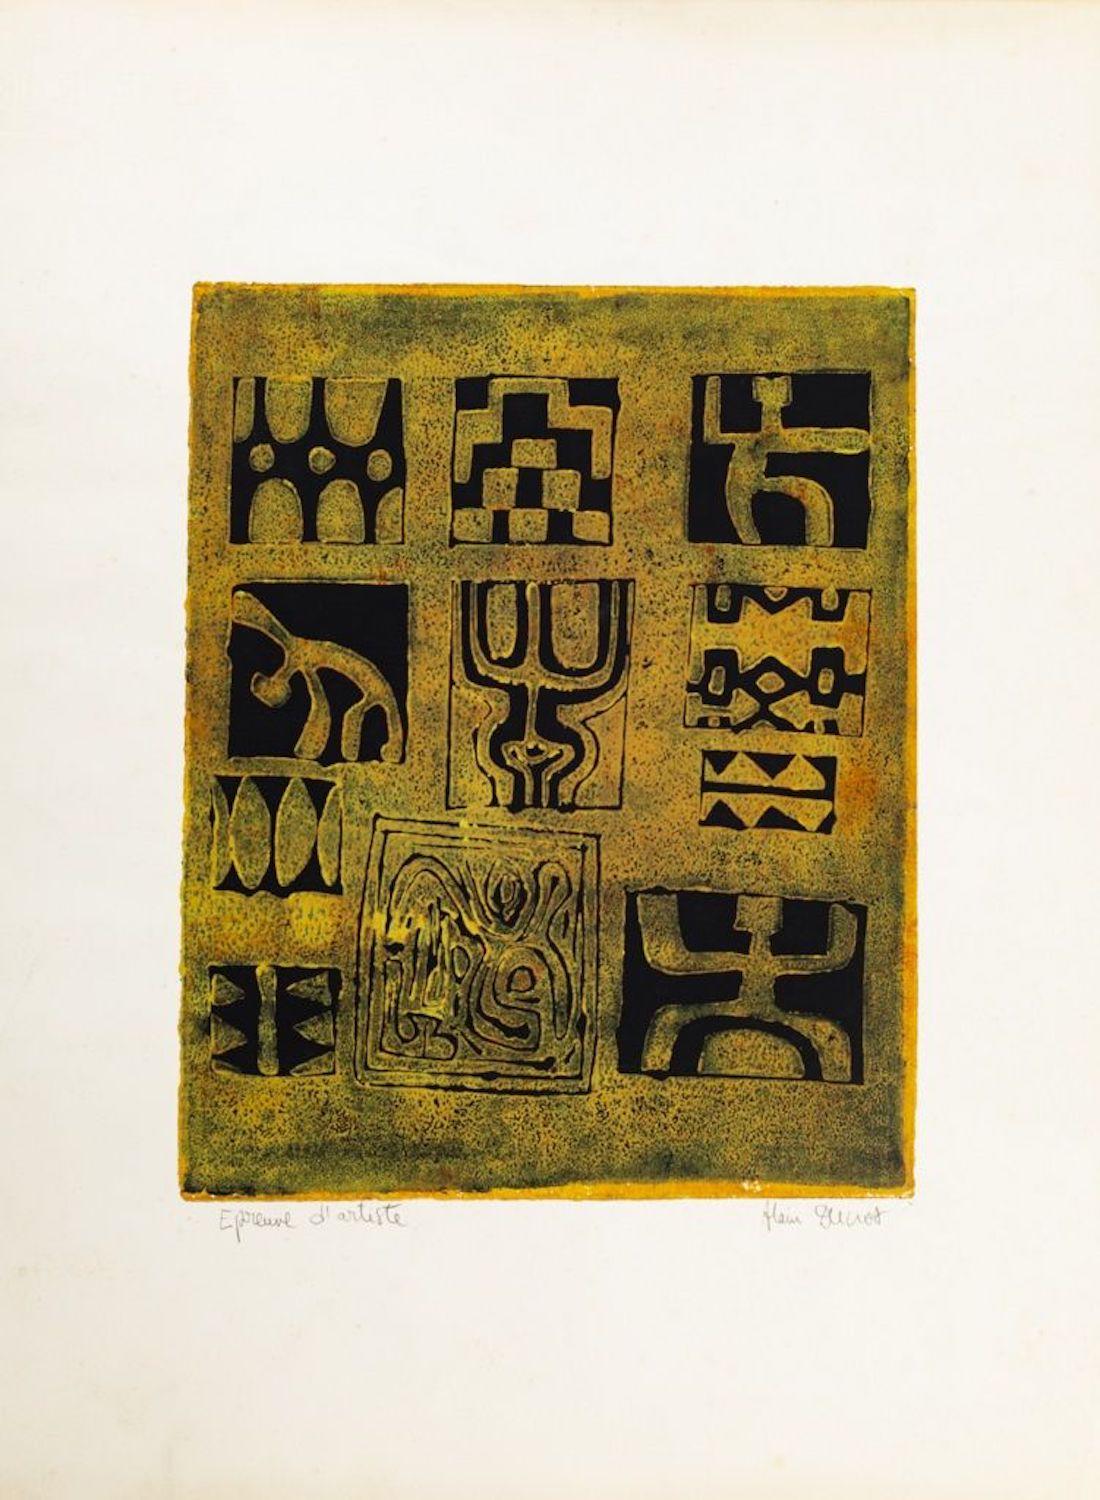 Image dimensions: 30 x 24.2 cm.

Abstract Symbolism is a colored artwork realized during the 1970s by Alain Ducros.

Mixed colored lithograph.

Hand-signed on the lower right.

Artist proof (as reported on the lower left).